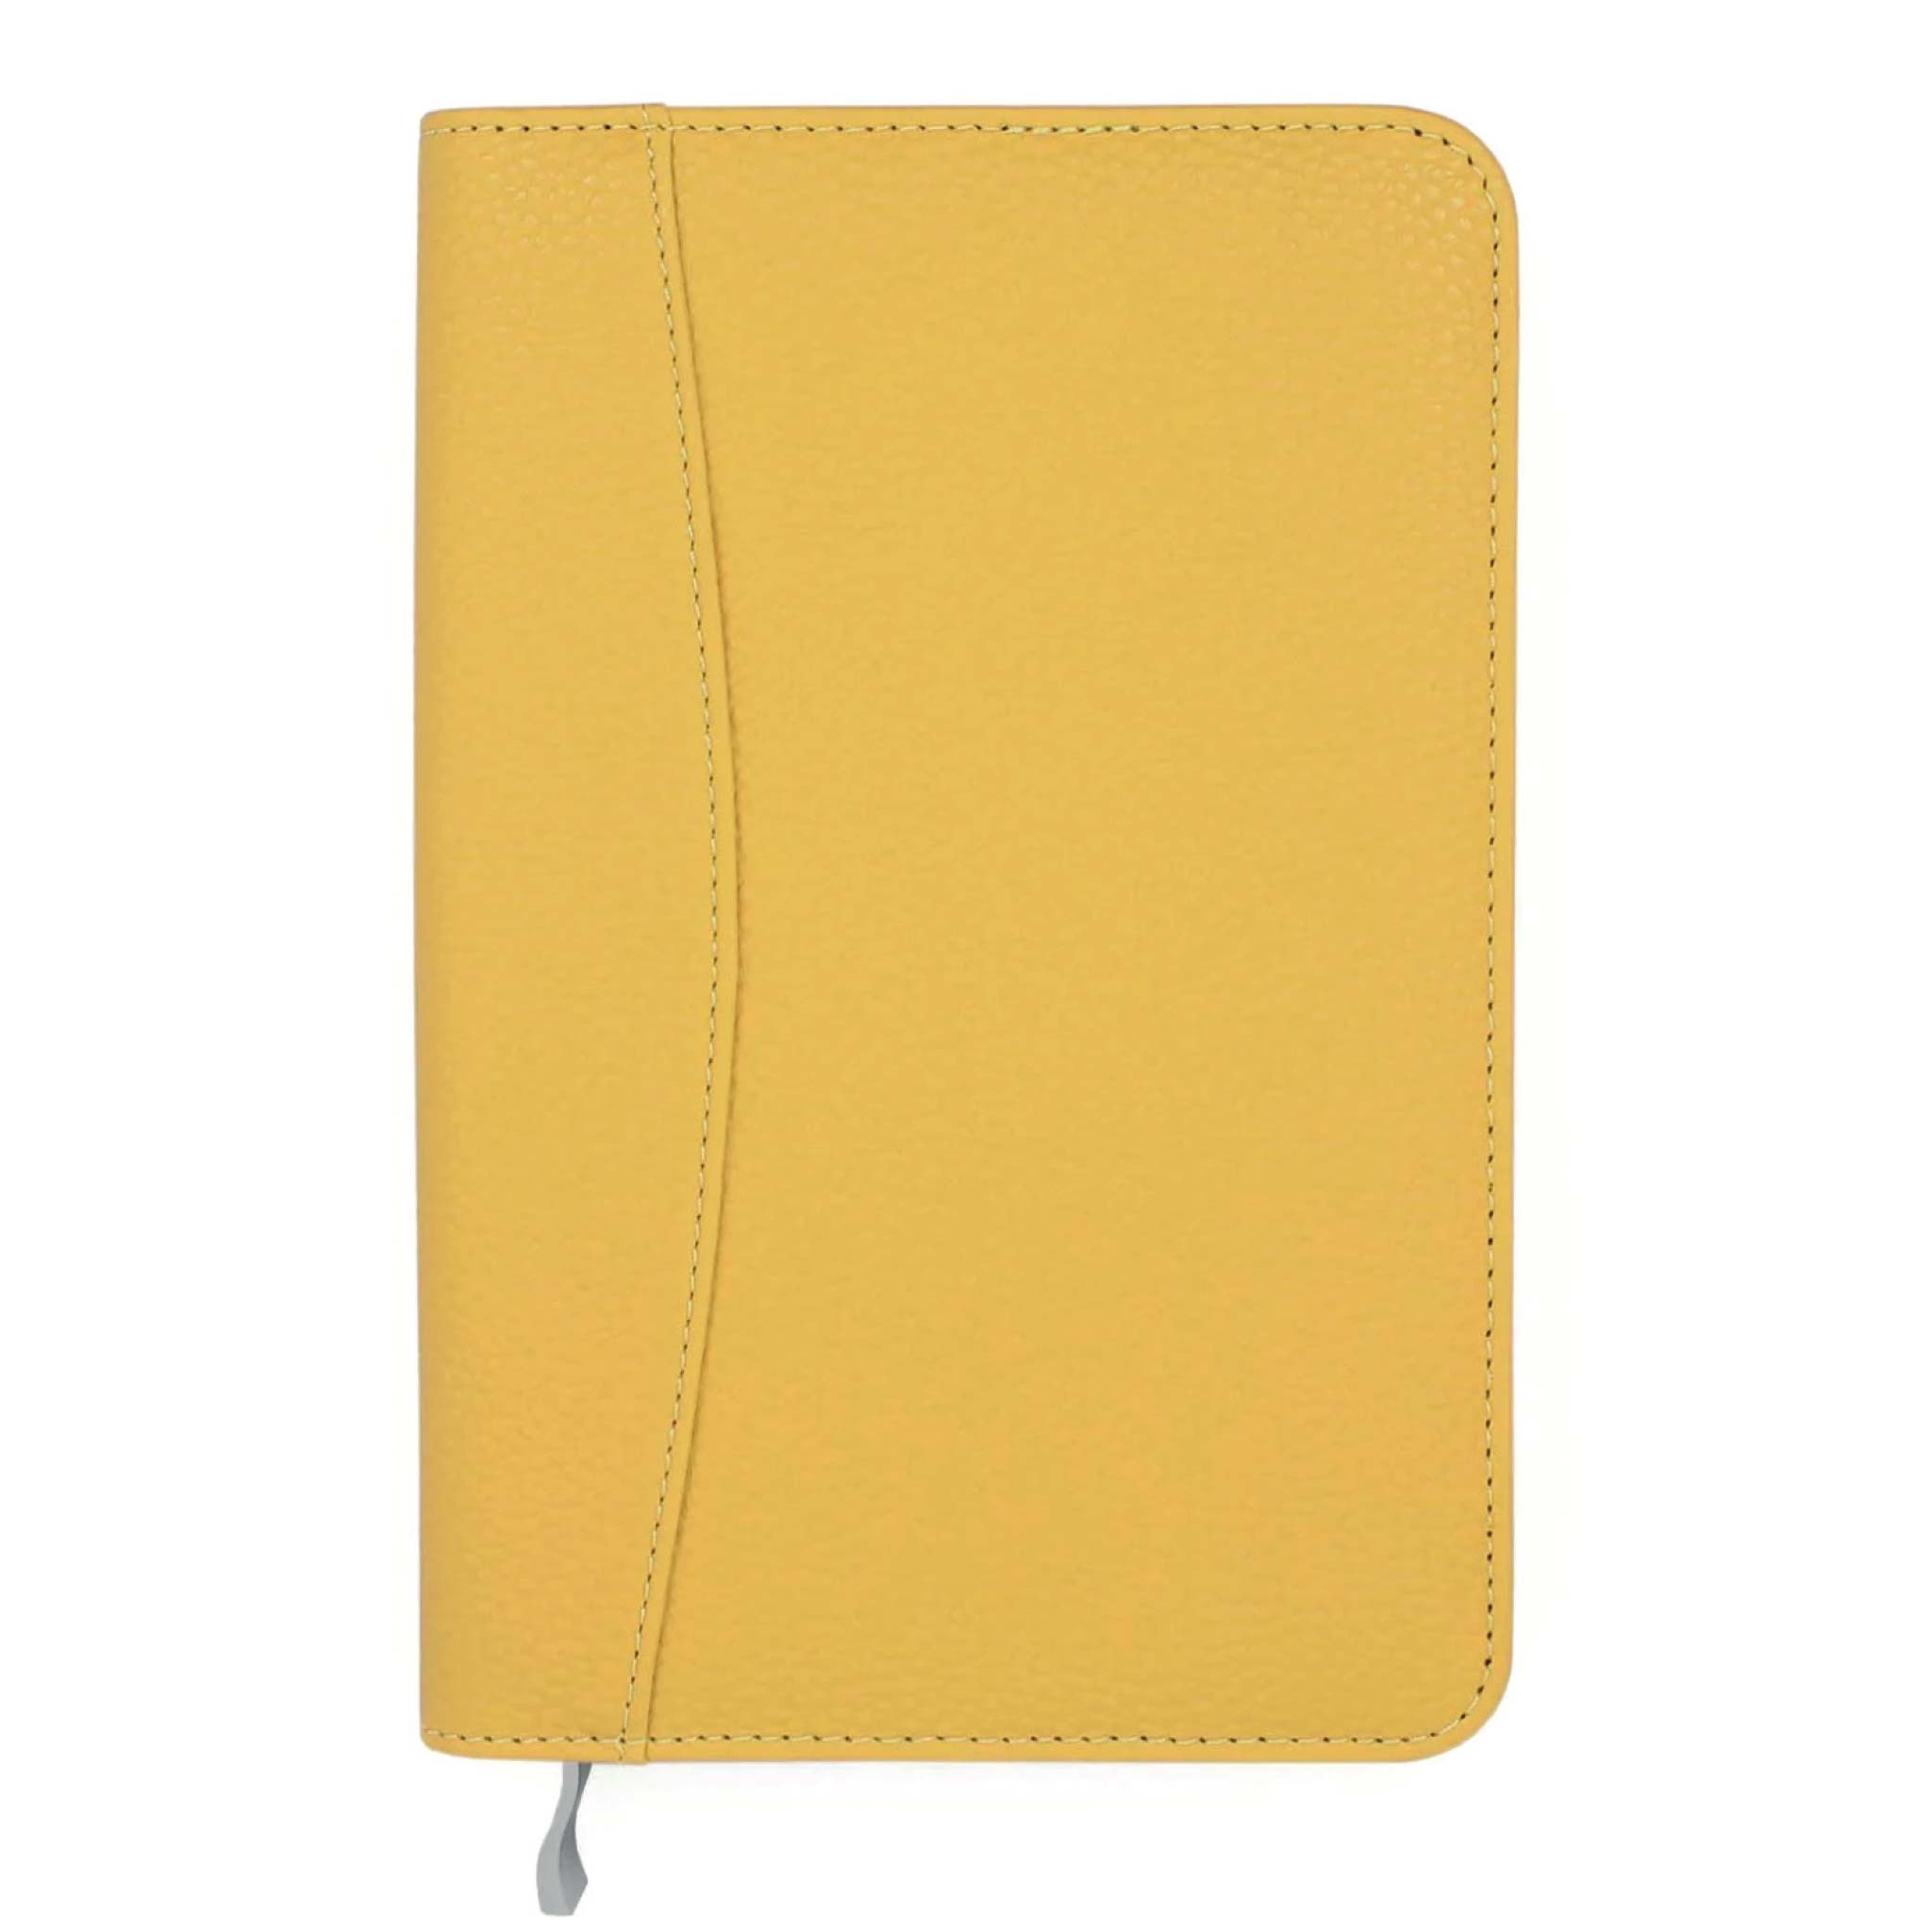 Pocket Life Book Diary Cover